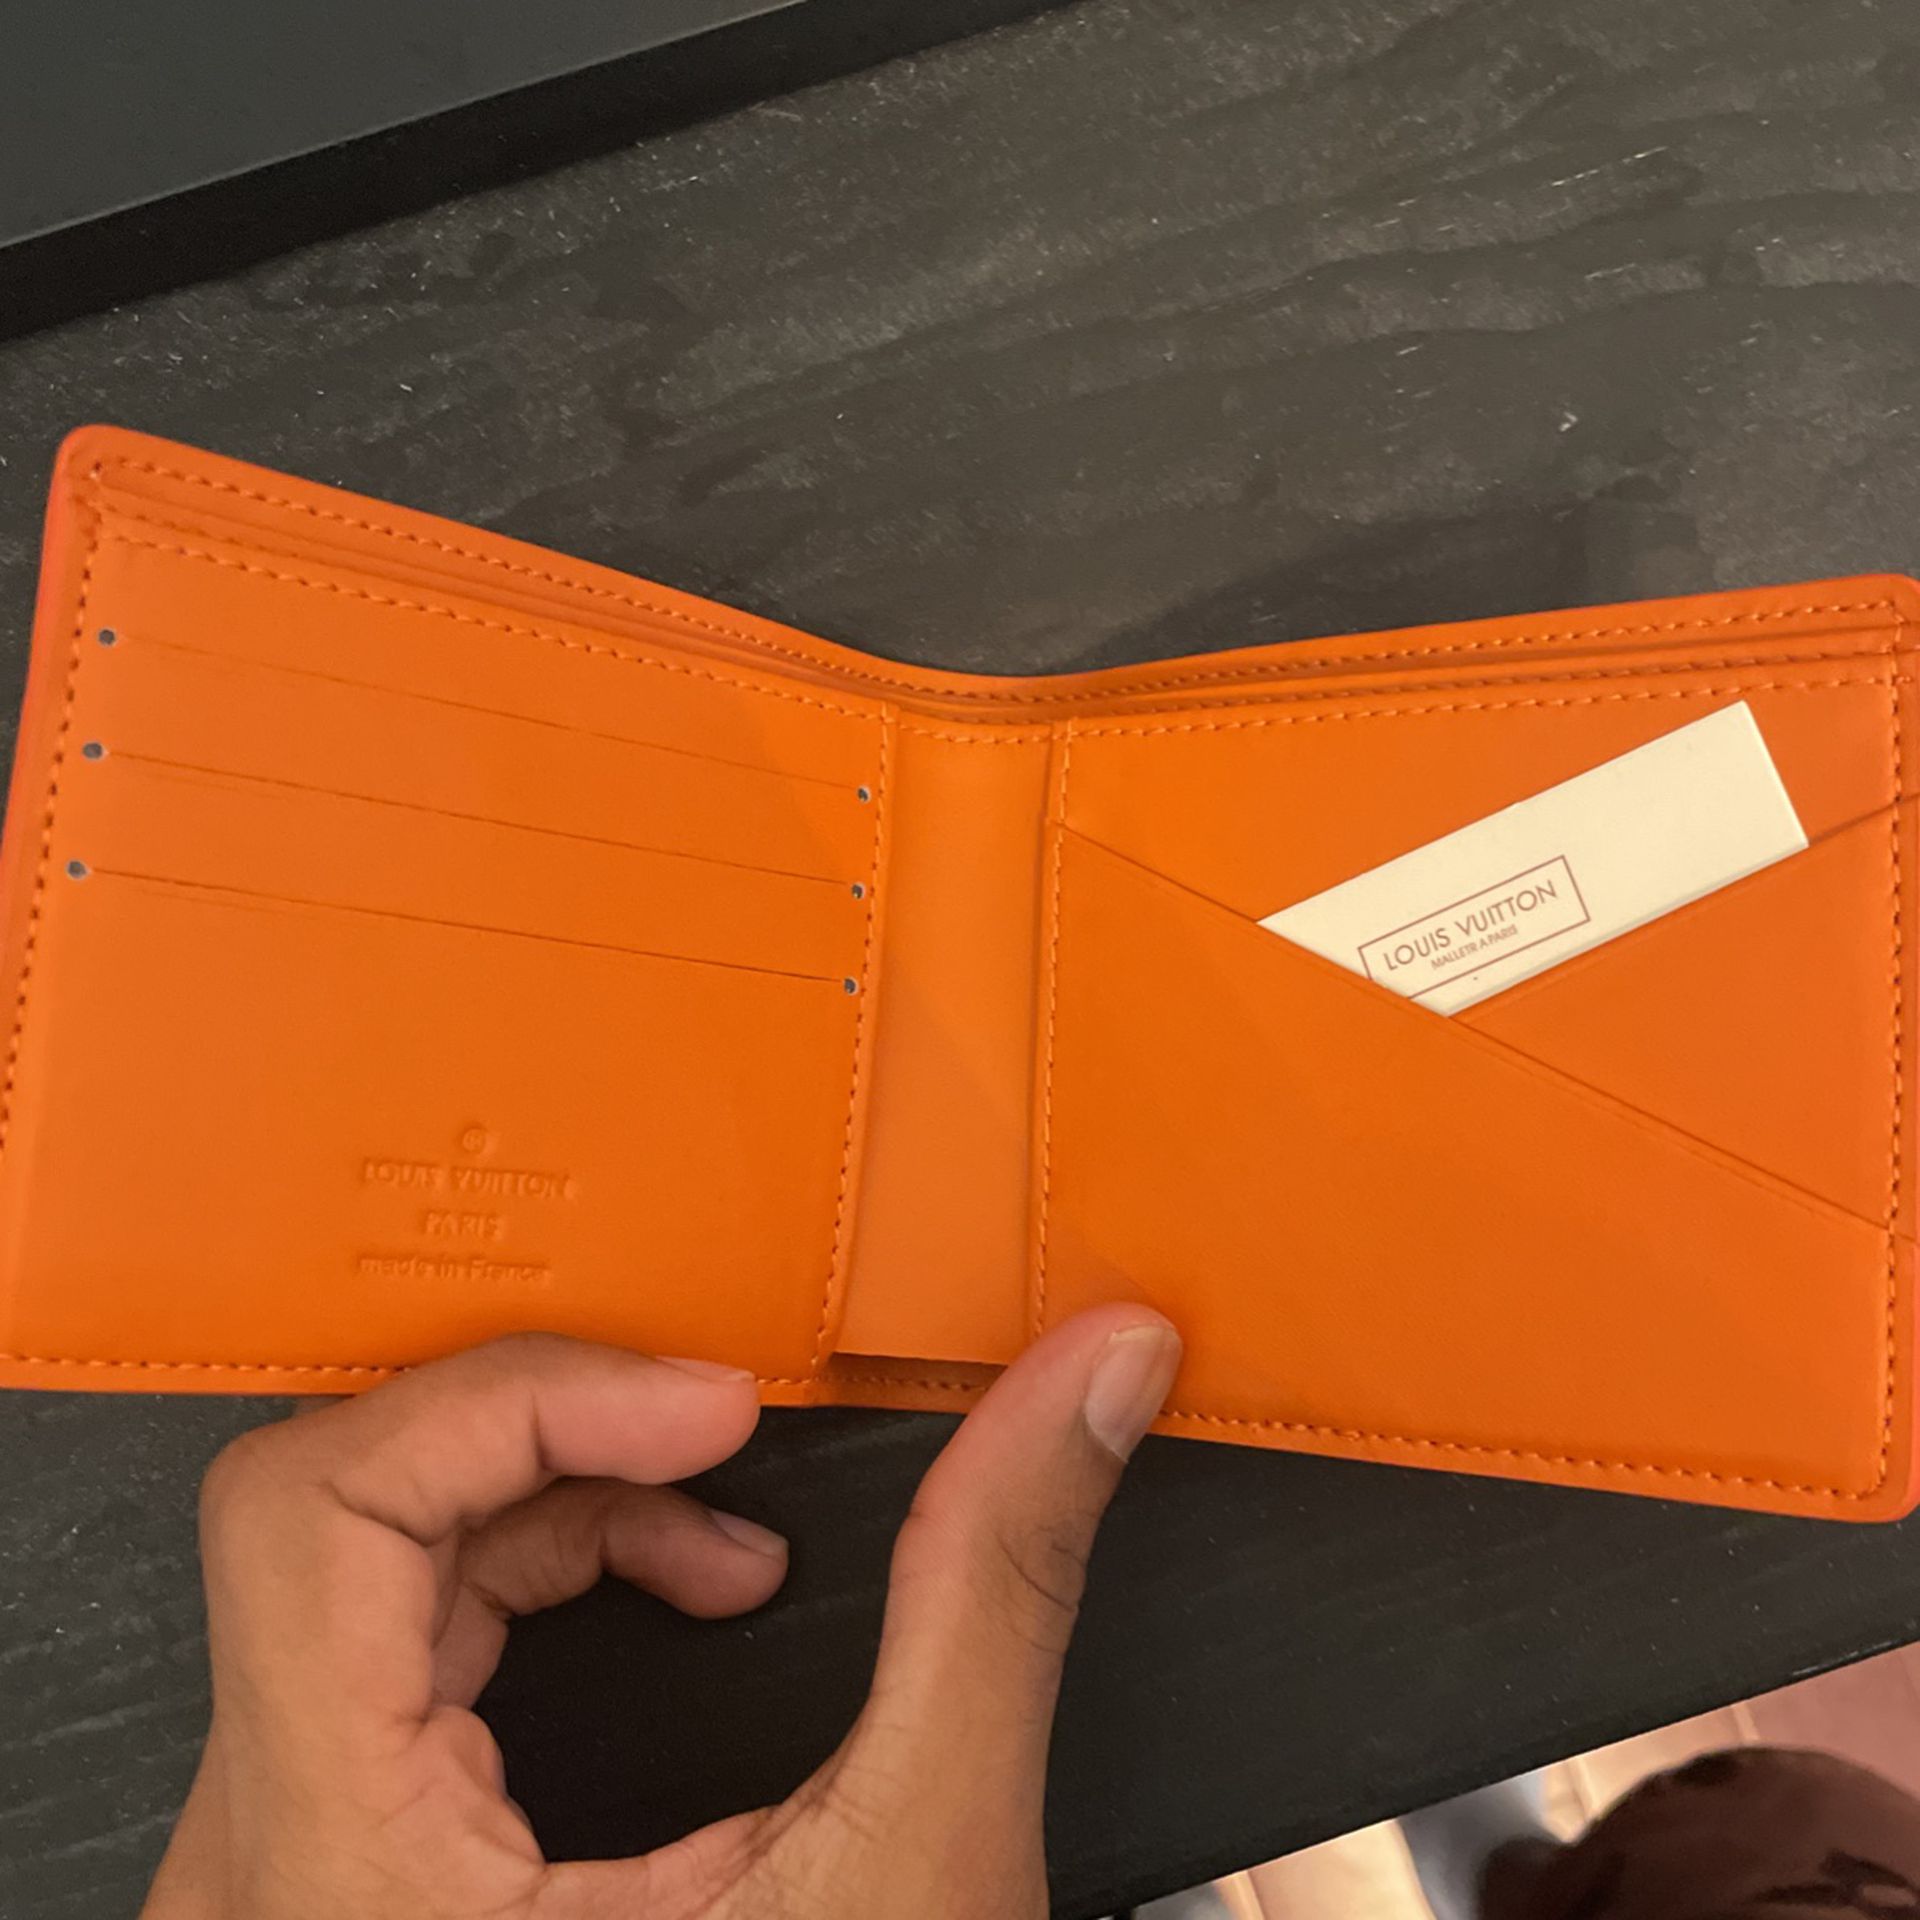 Louis Vuitton Wallets for sale in Oklahoma City, Oklahoma